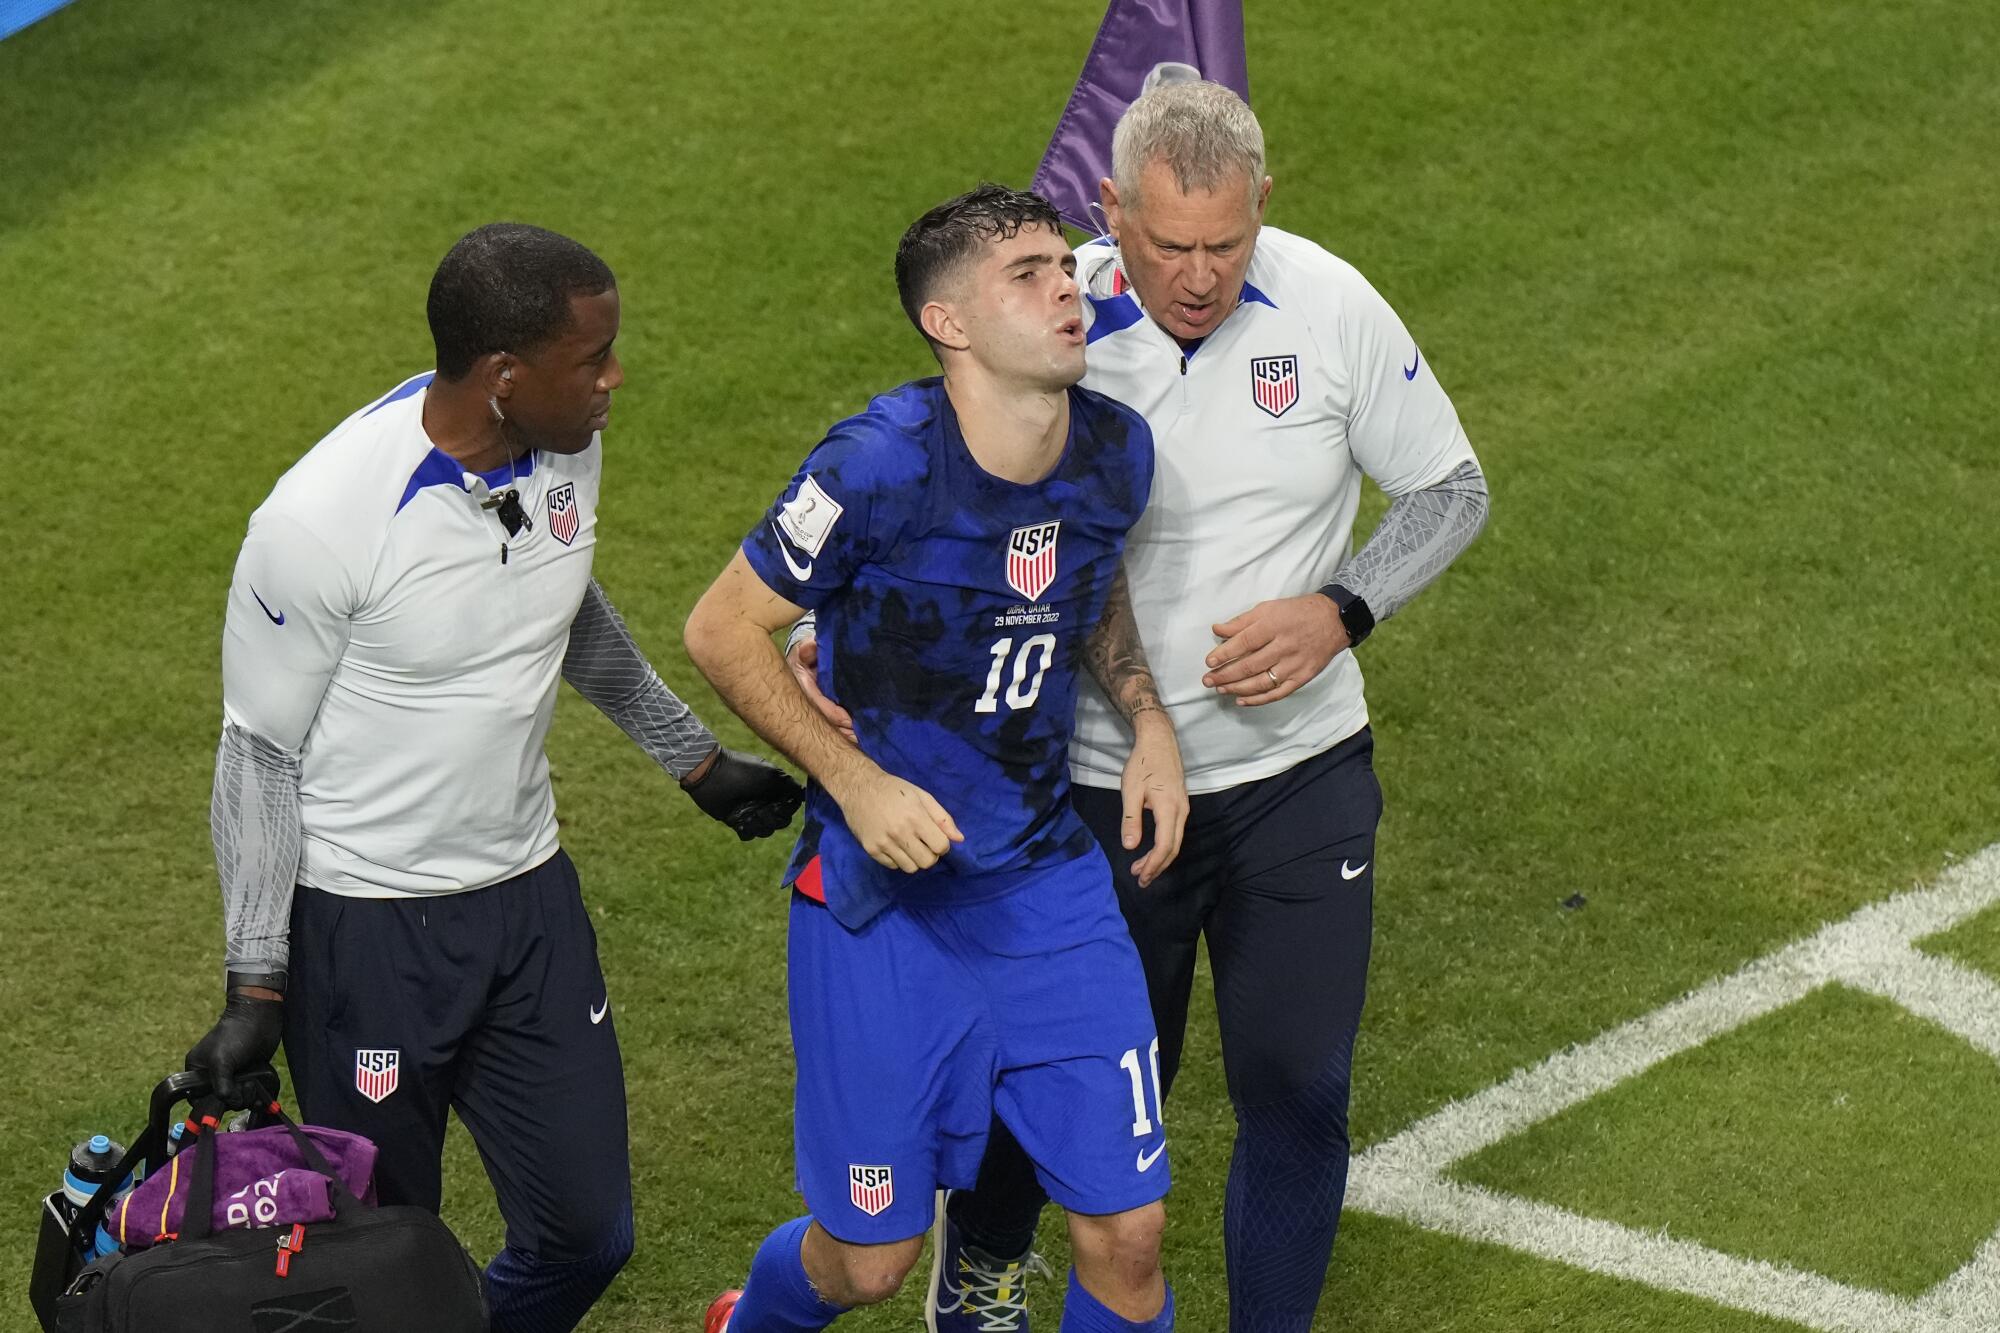 U.S. forward Christian Pulisic is assisted by trainers as he walks off the field after sustaining an abdominal injury.